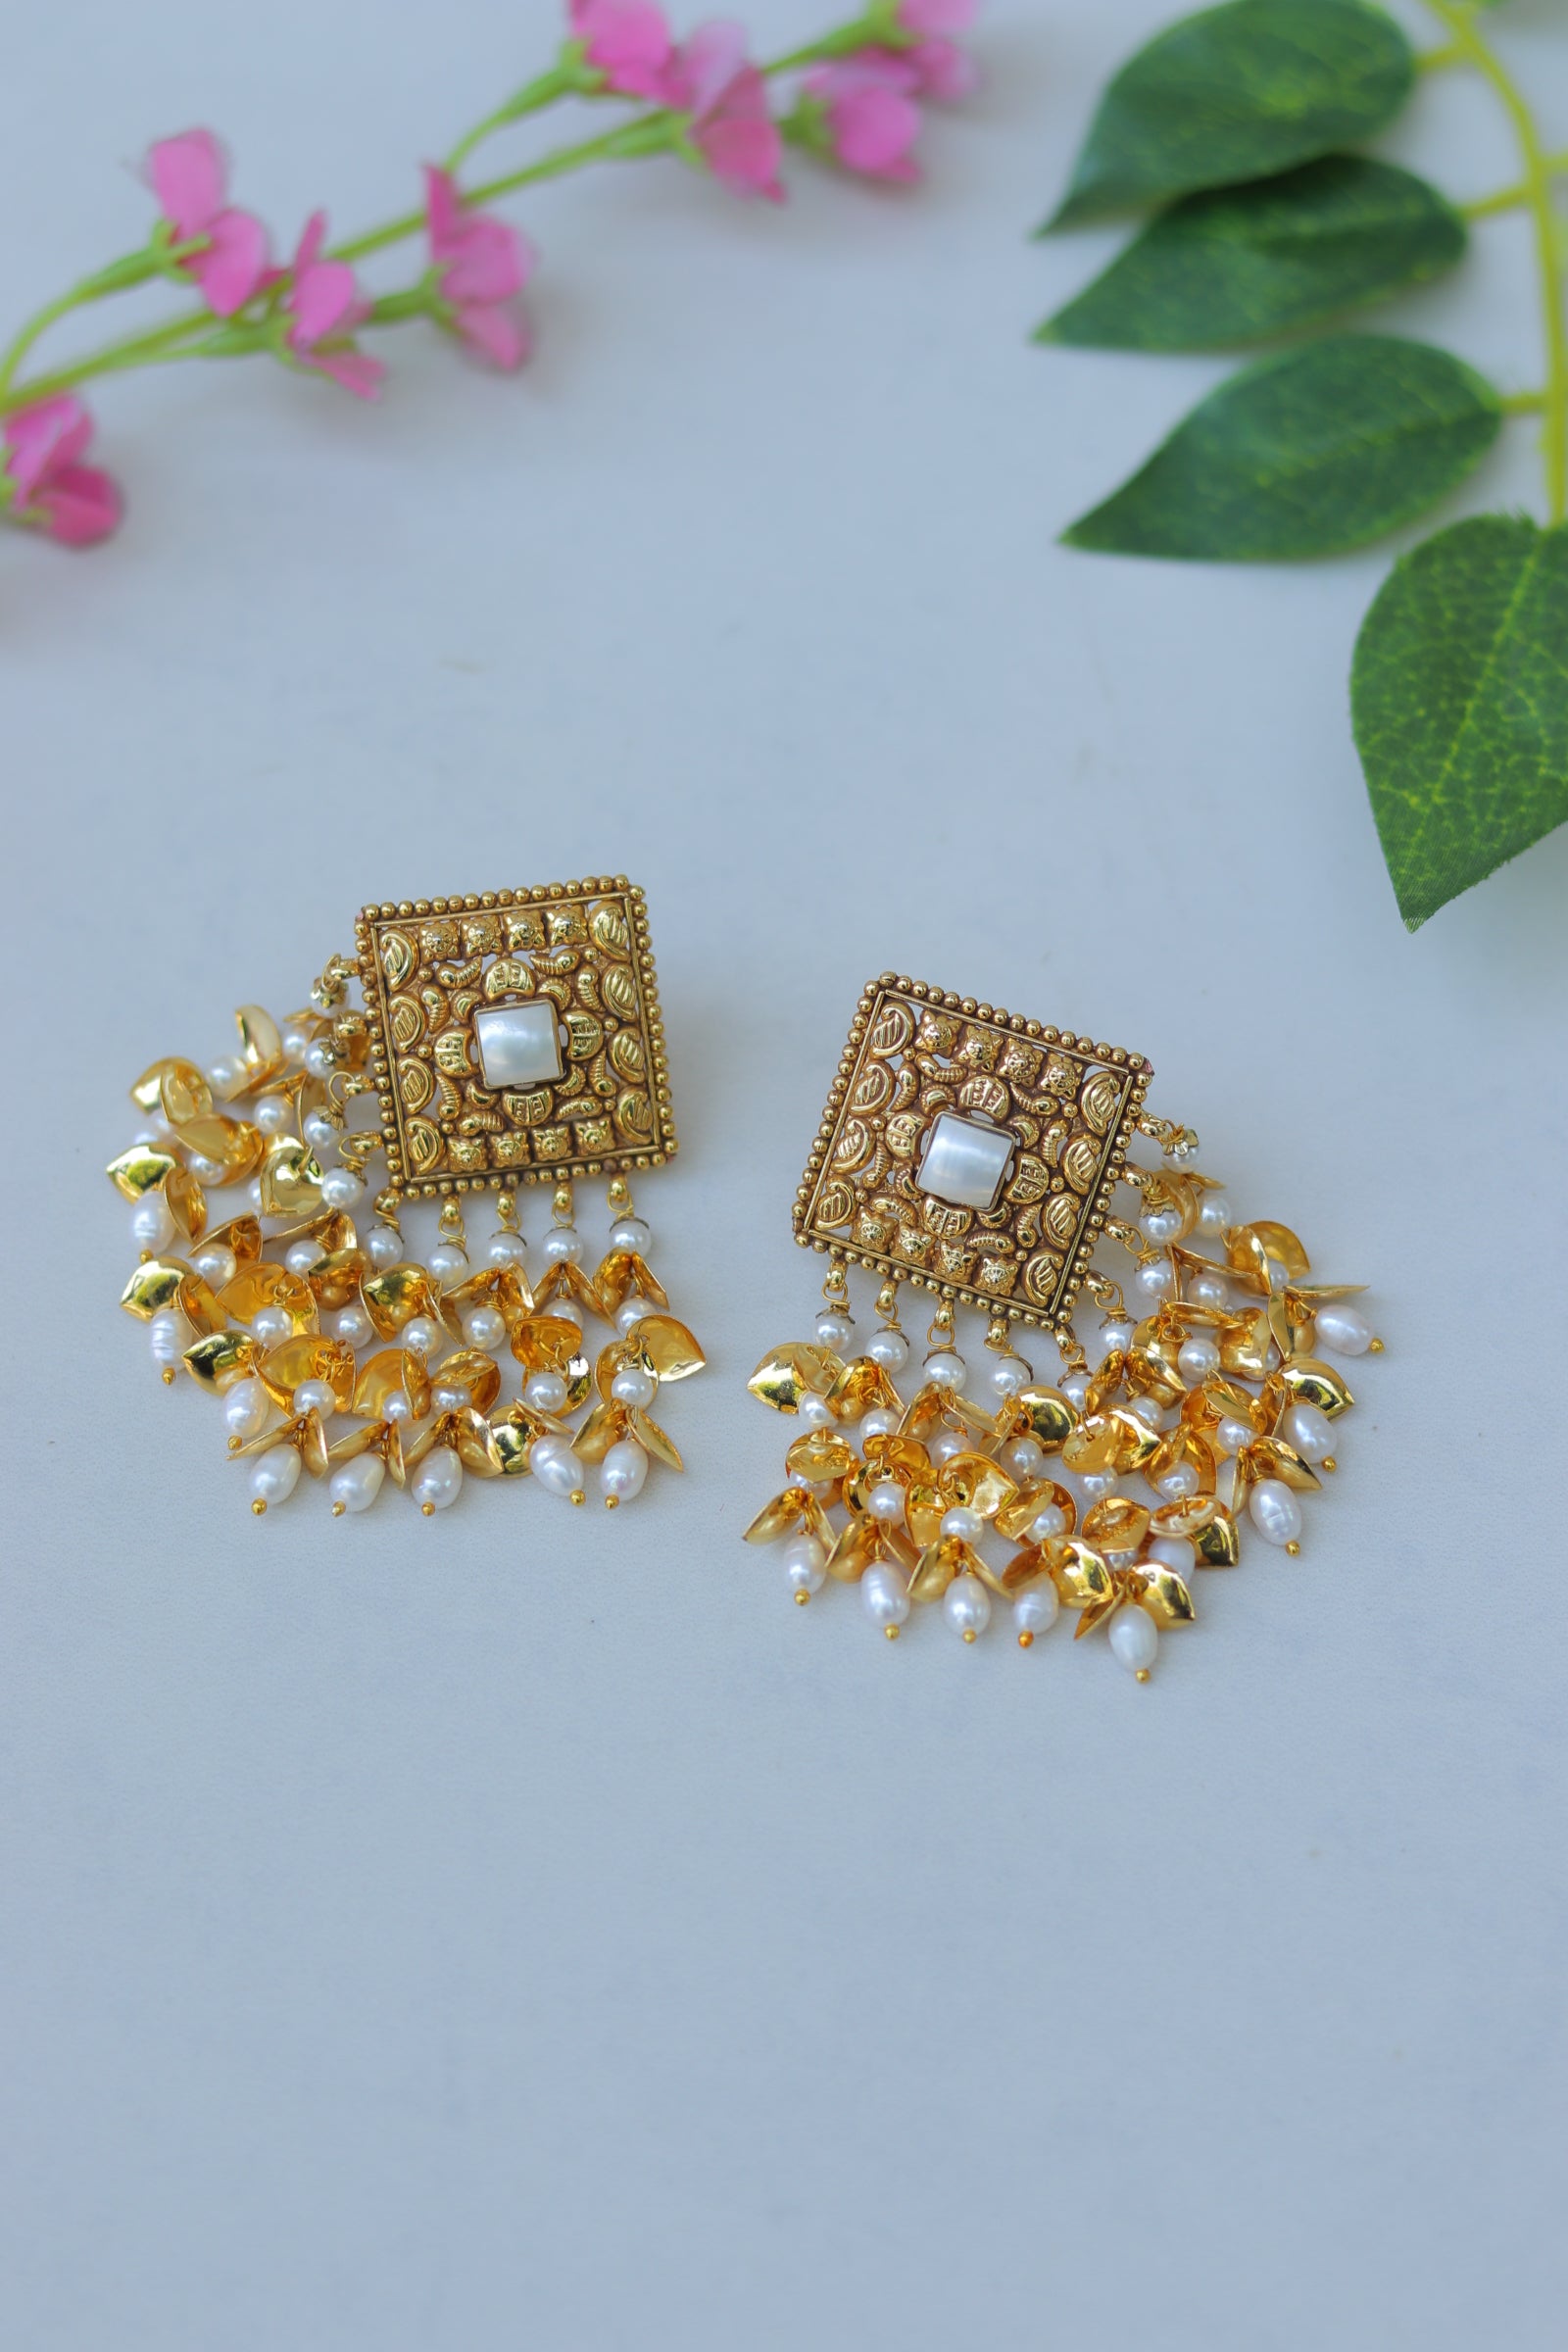 Shop Now Antique Gold Tone Hanging Earrings